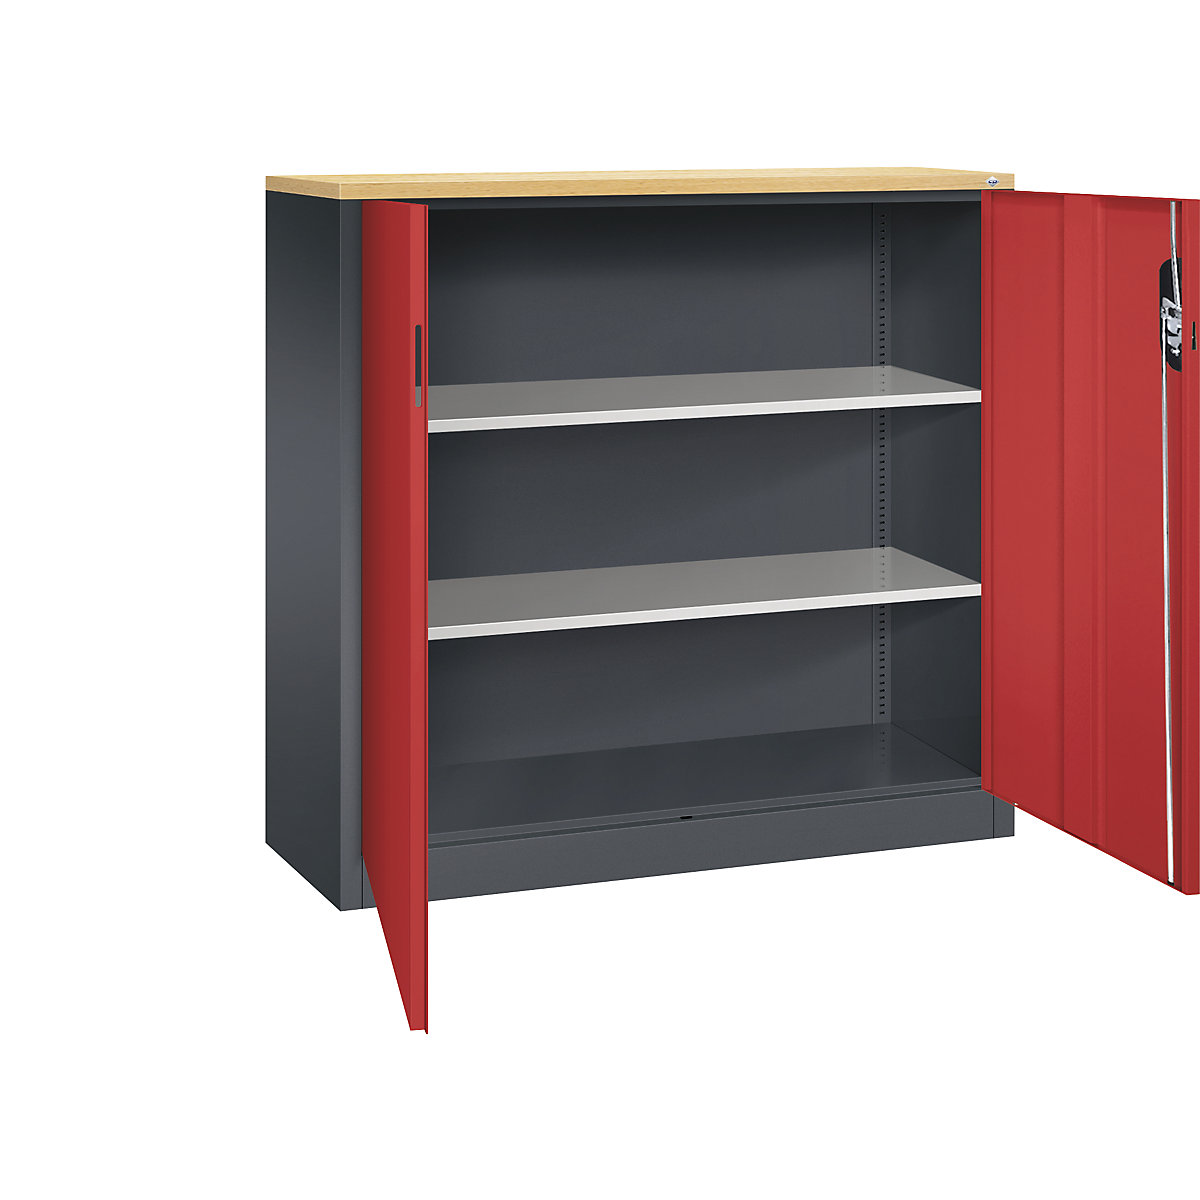 C+P – ACURADO filing sideboard, 3 file heights, HxWxD 1200 x 1200 x 400 mm, black grey / flame red